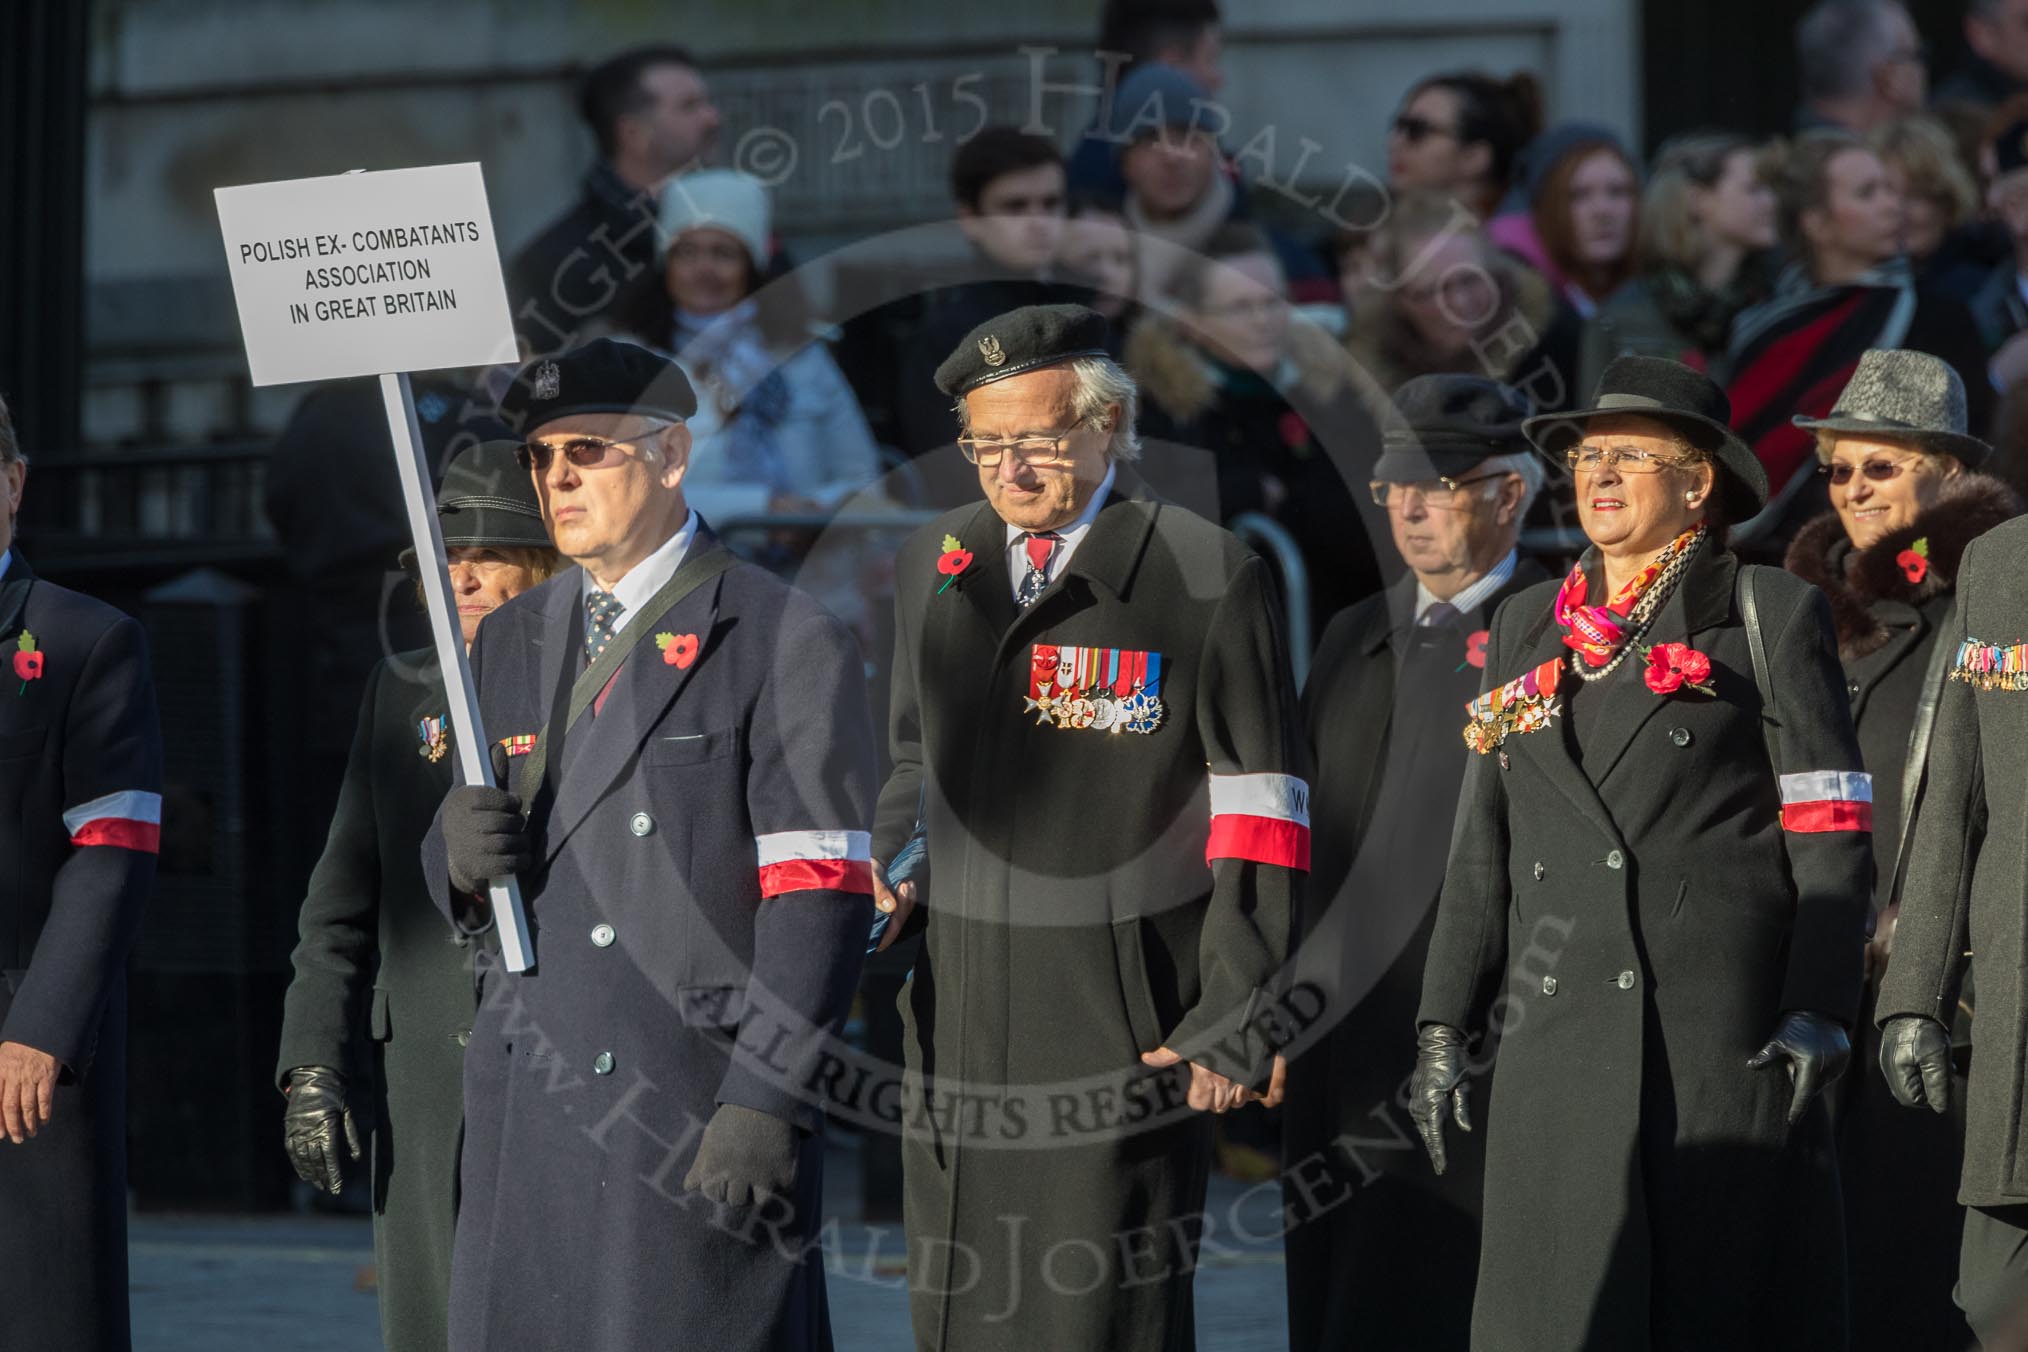 March Past, Remembrance Sunday at the Cenotaph 2016: M42 SPPW - Friends of Polish Veterans Association.
Cenotaph, Whitehall, London SW1,
London,
Greater London,
United Kingdom,
on 13 November 2016 at 13:19, image #2966